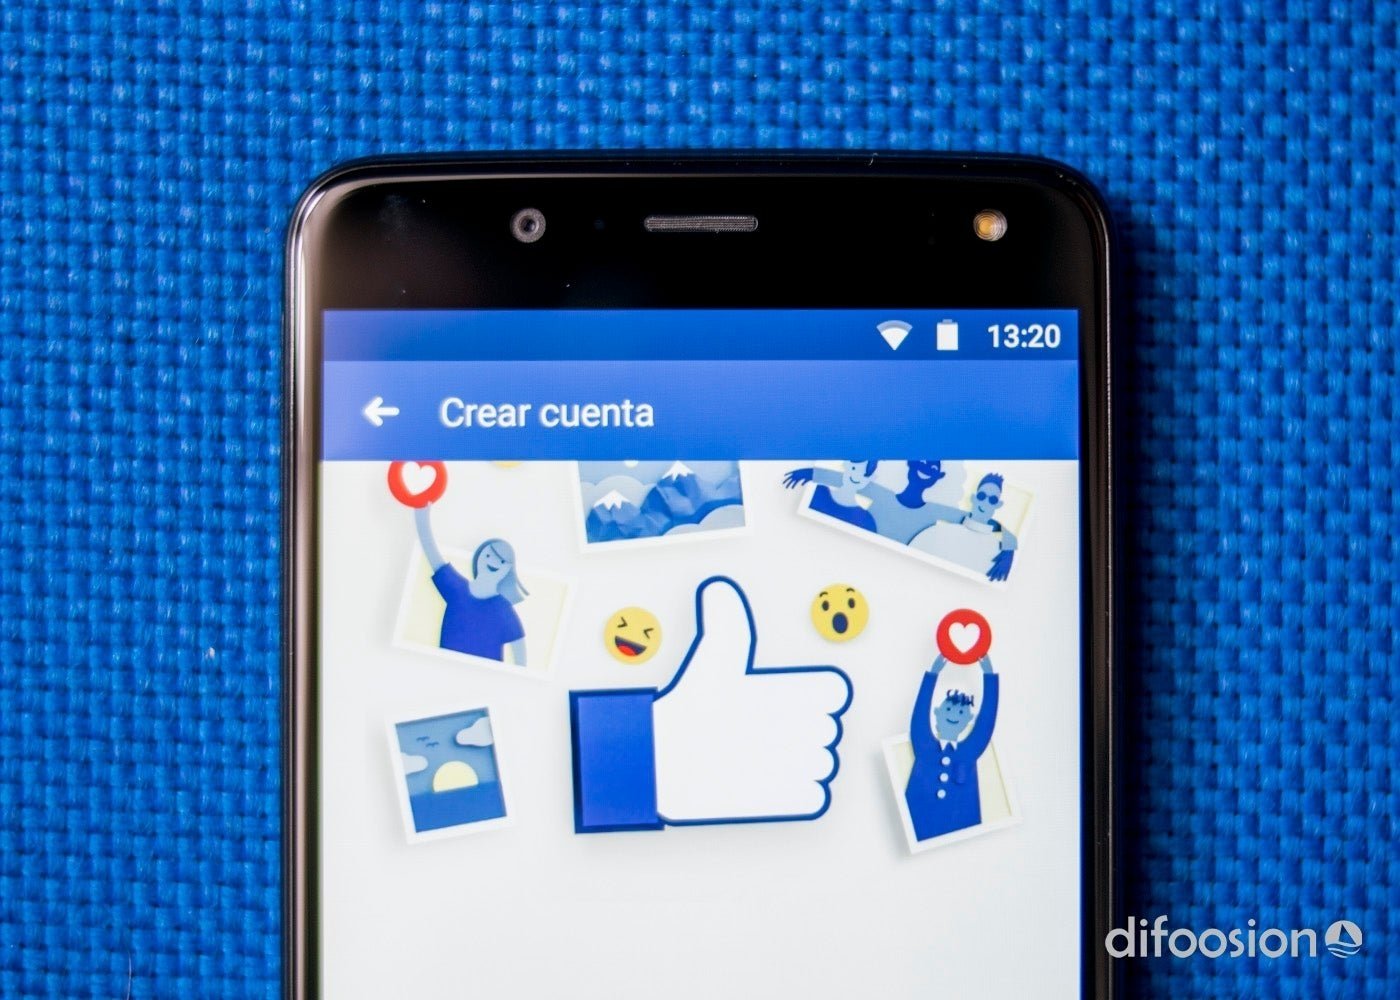 Facebook Android 2